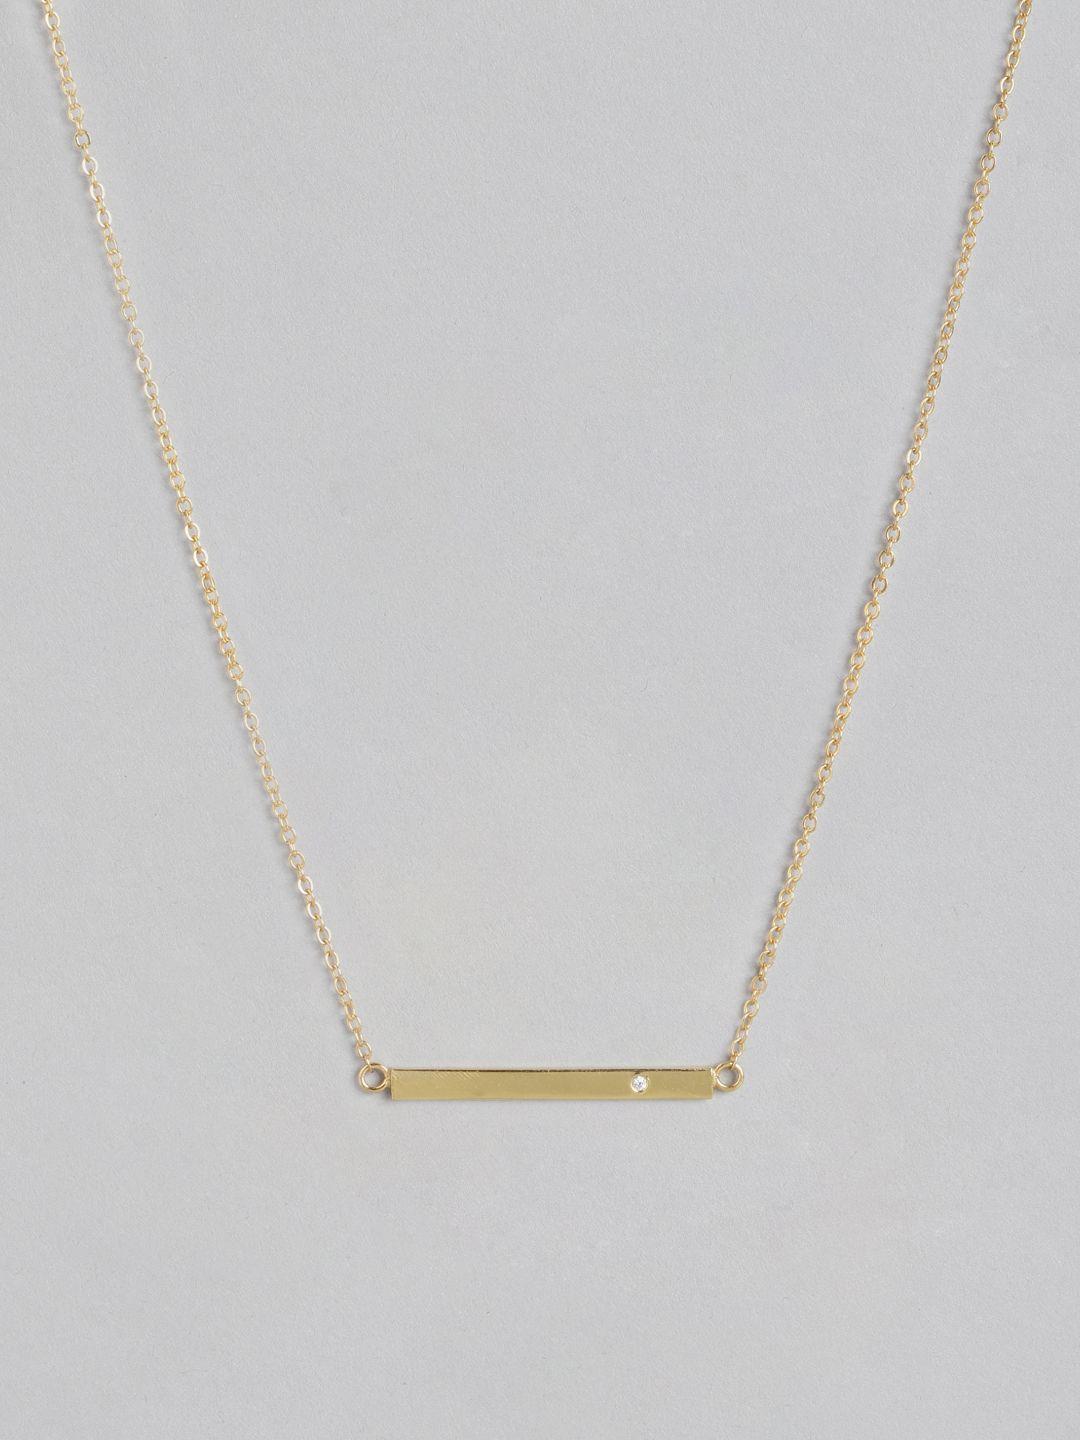 carlton london 18k gold-plated necklace